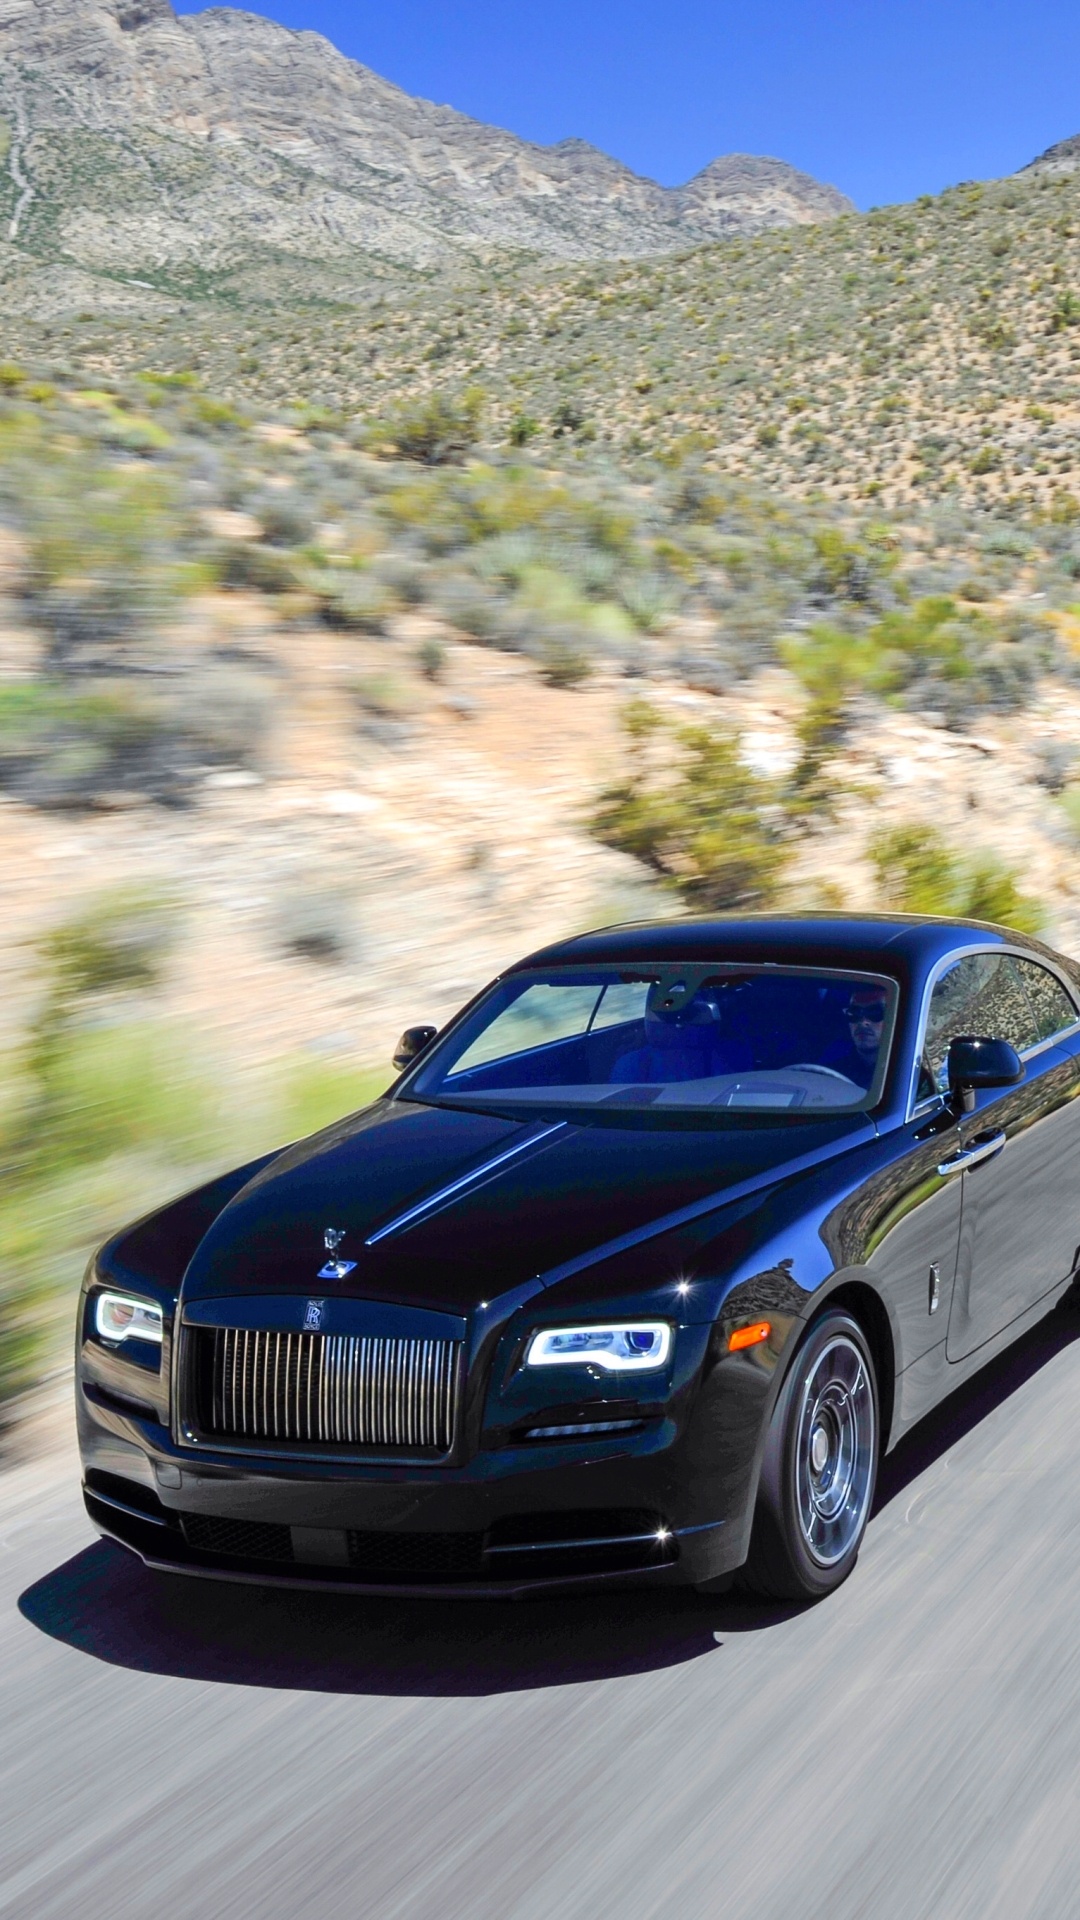 Rolls-Royce Wraith, Classy vehicle, Sophisticated design, Unmatched luxury, 1080x1920 Full HD Handy